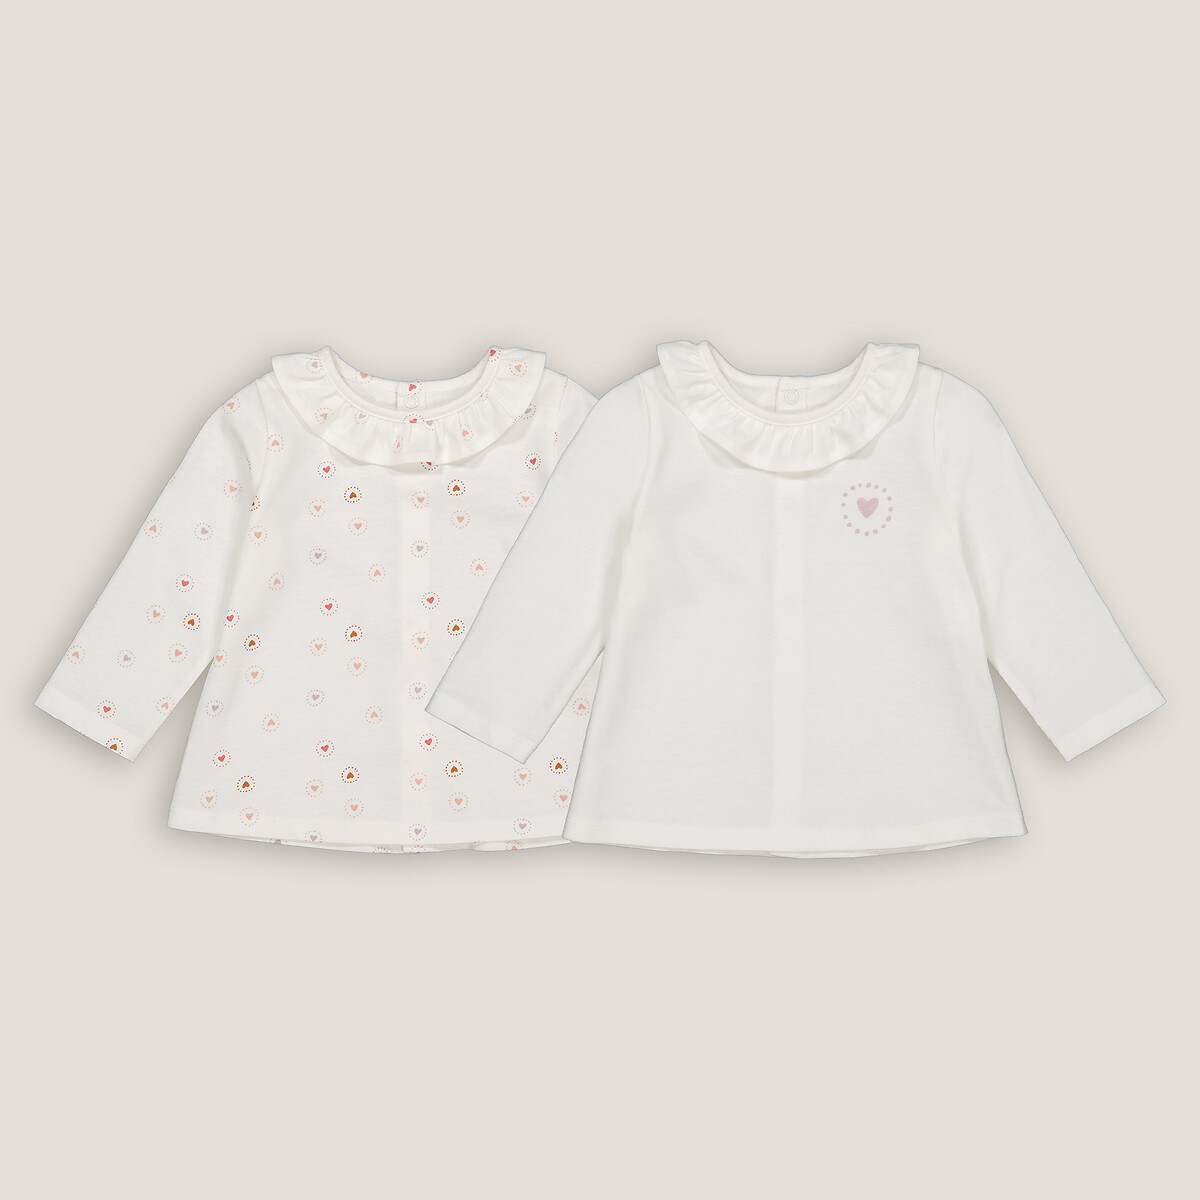 Pack of 2 T-Shirts in Heart Print Cotton, Ruffled Crew Neck and Long Sleeves